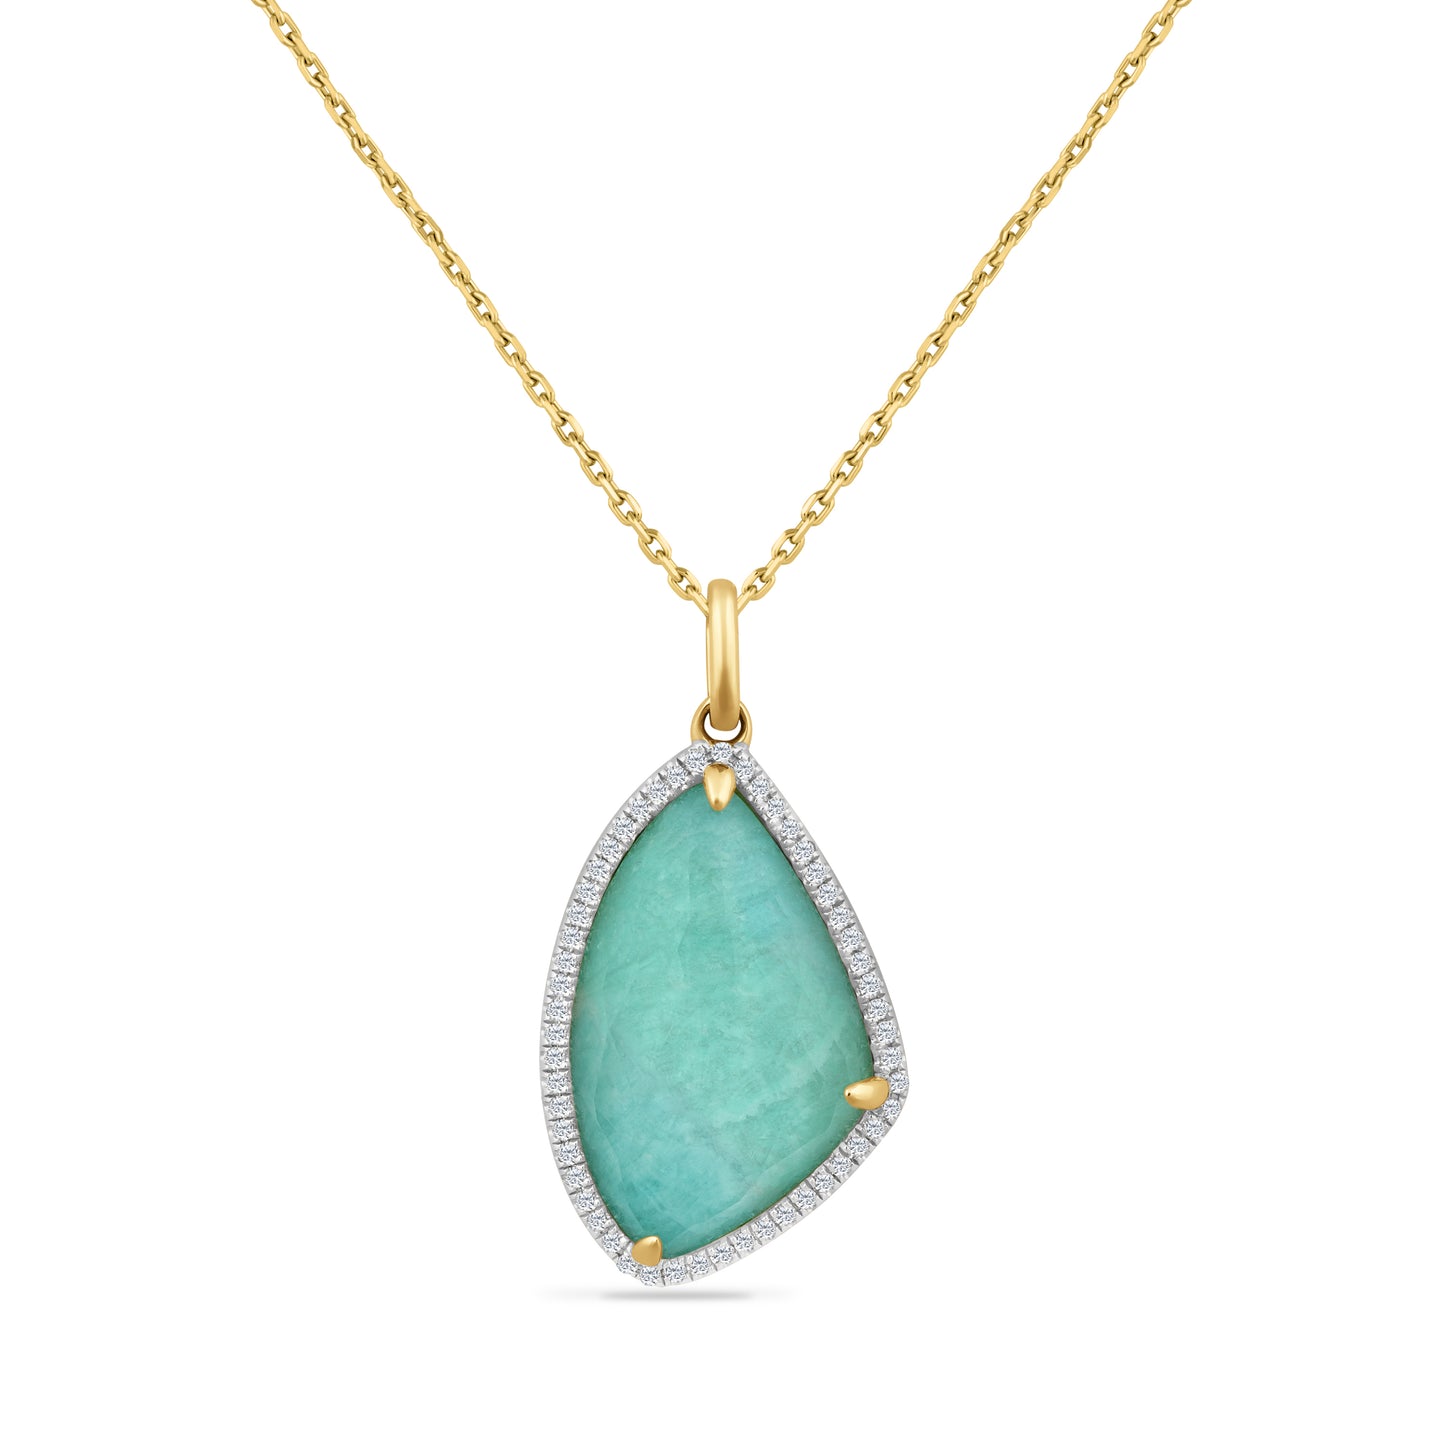 14K YELLOW GOLD NECKLACE WITH 1 FANCY SHAPE FLAT AMAZONITE, CRYSTAL PENDANT 15MMX22MM. SET WITH 53 DIAMONDS 0.18CT SUSPENDED ON 18 INCHES CABLE CHAIN